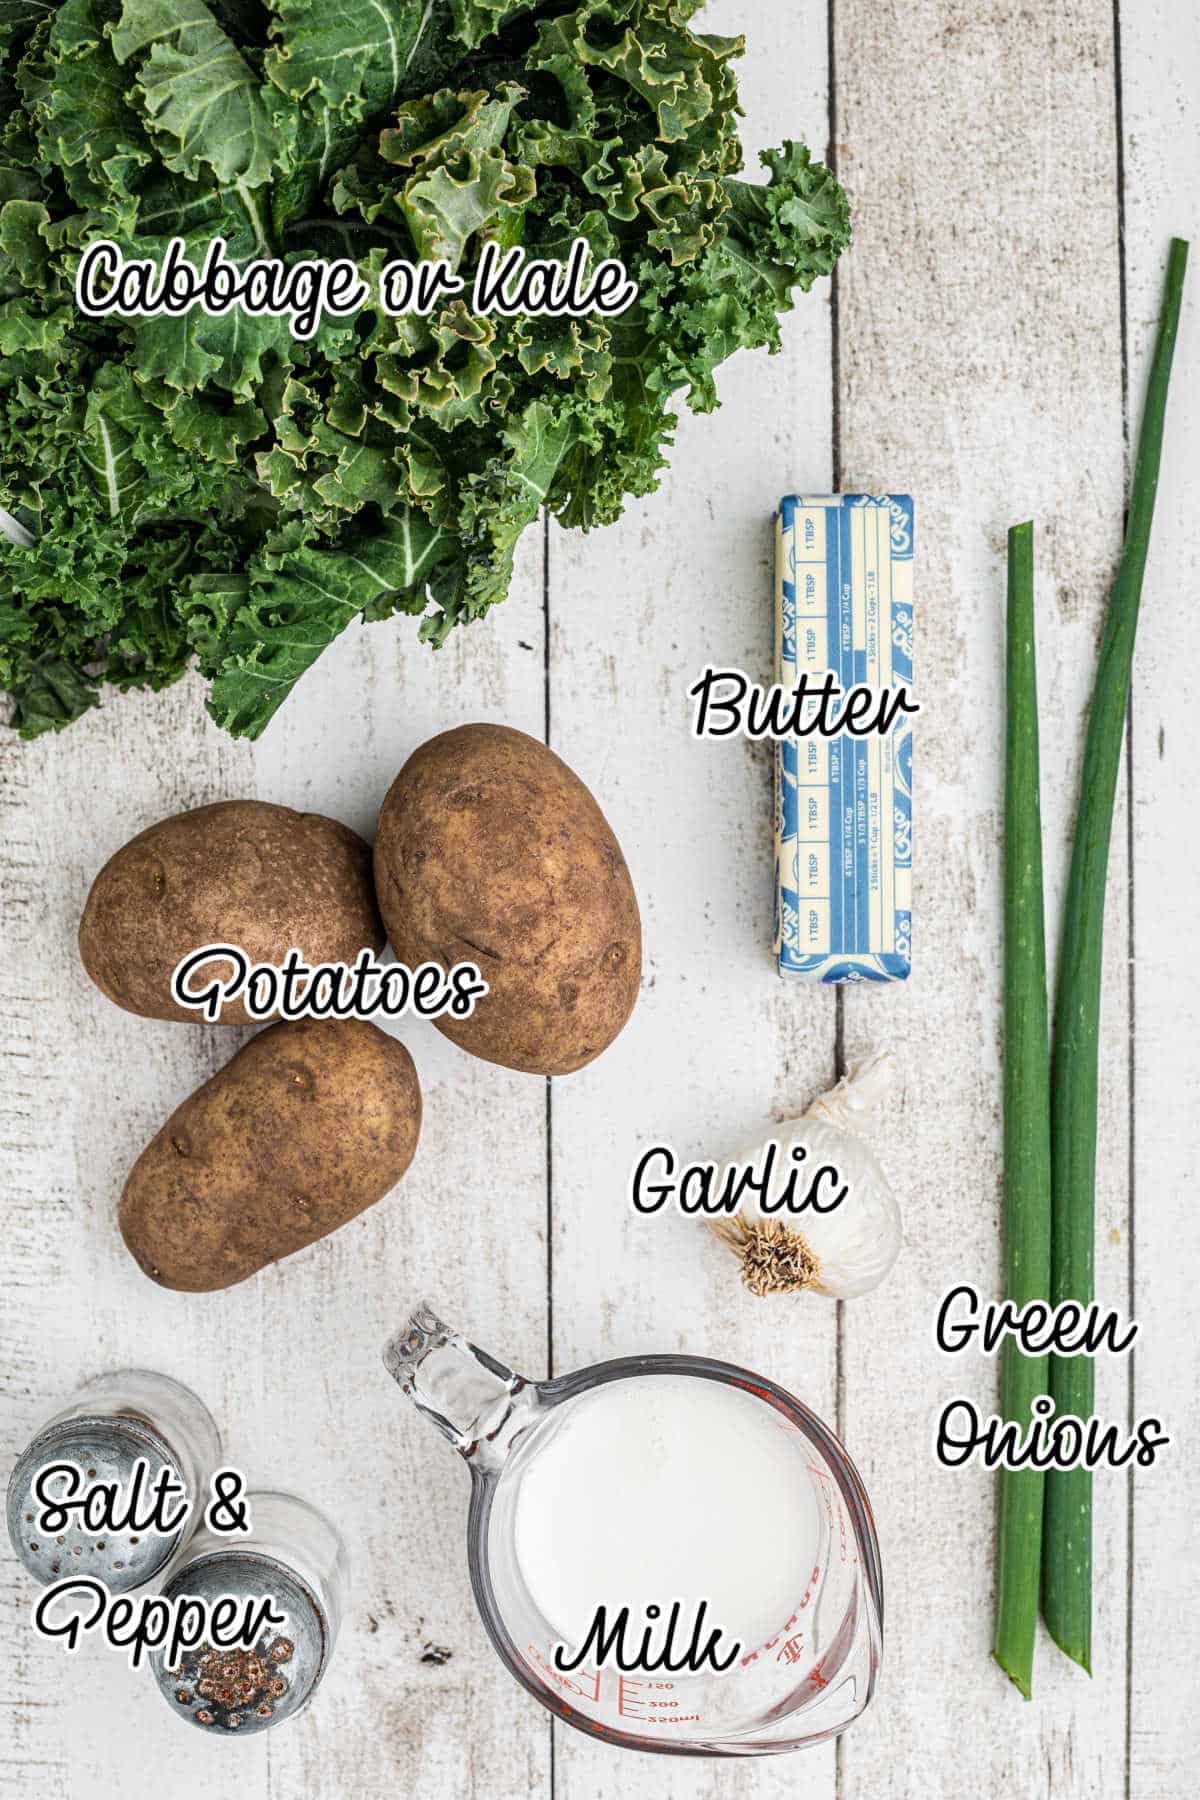 Ingredients needed to make traditional colcannon, with text overlay.